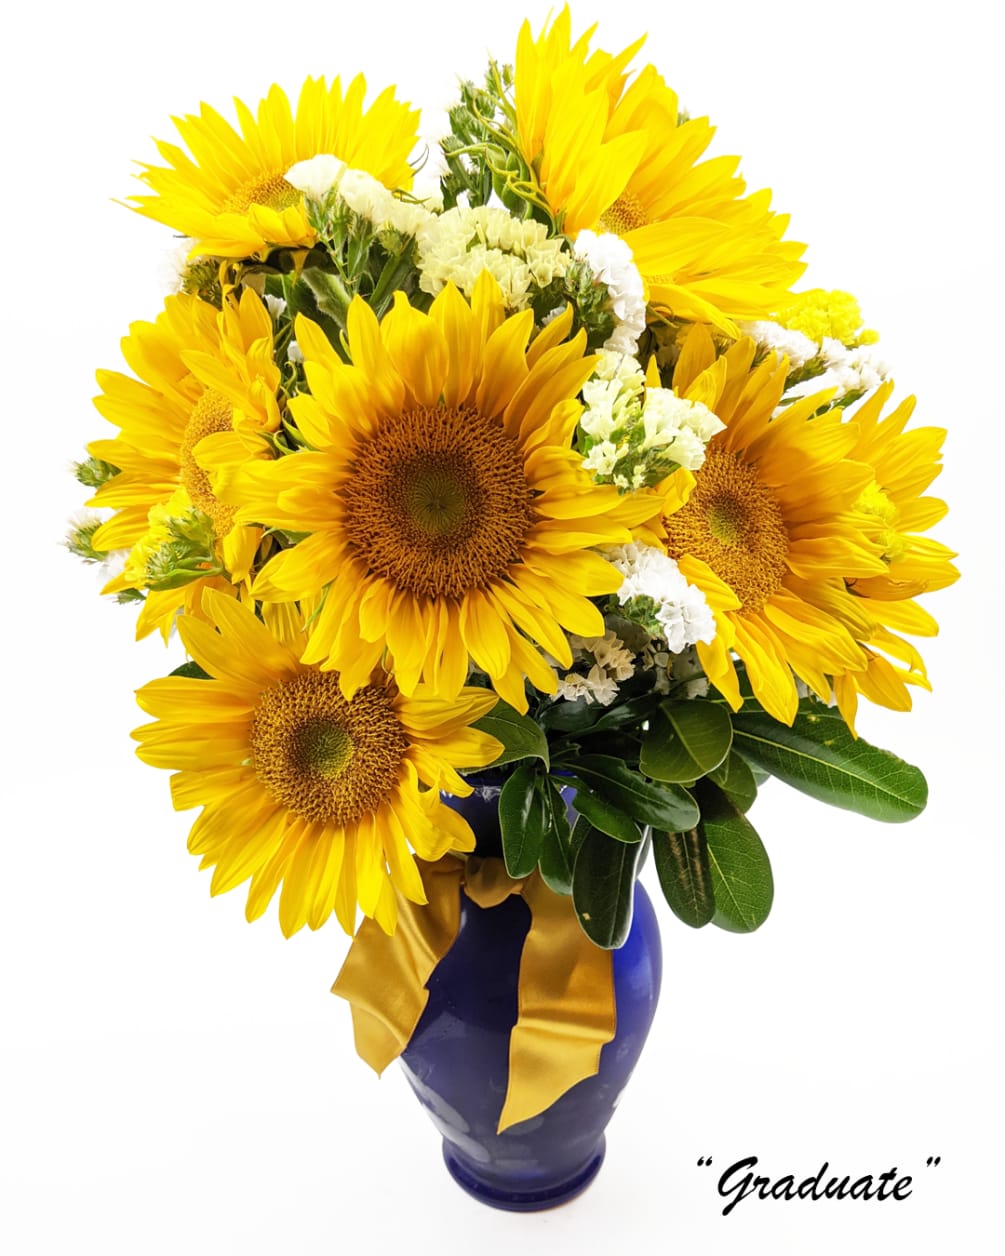 Hand-crafted mixed flower bouquet in a blue vase. The main flowers in